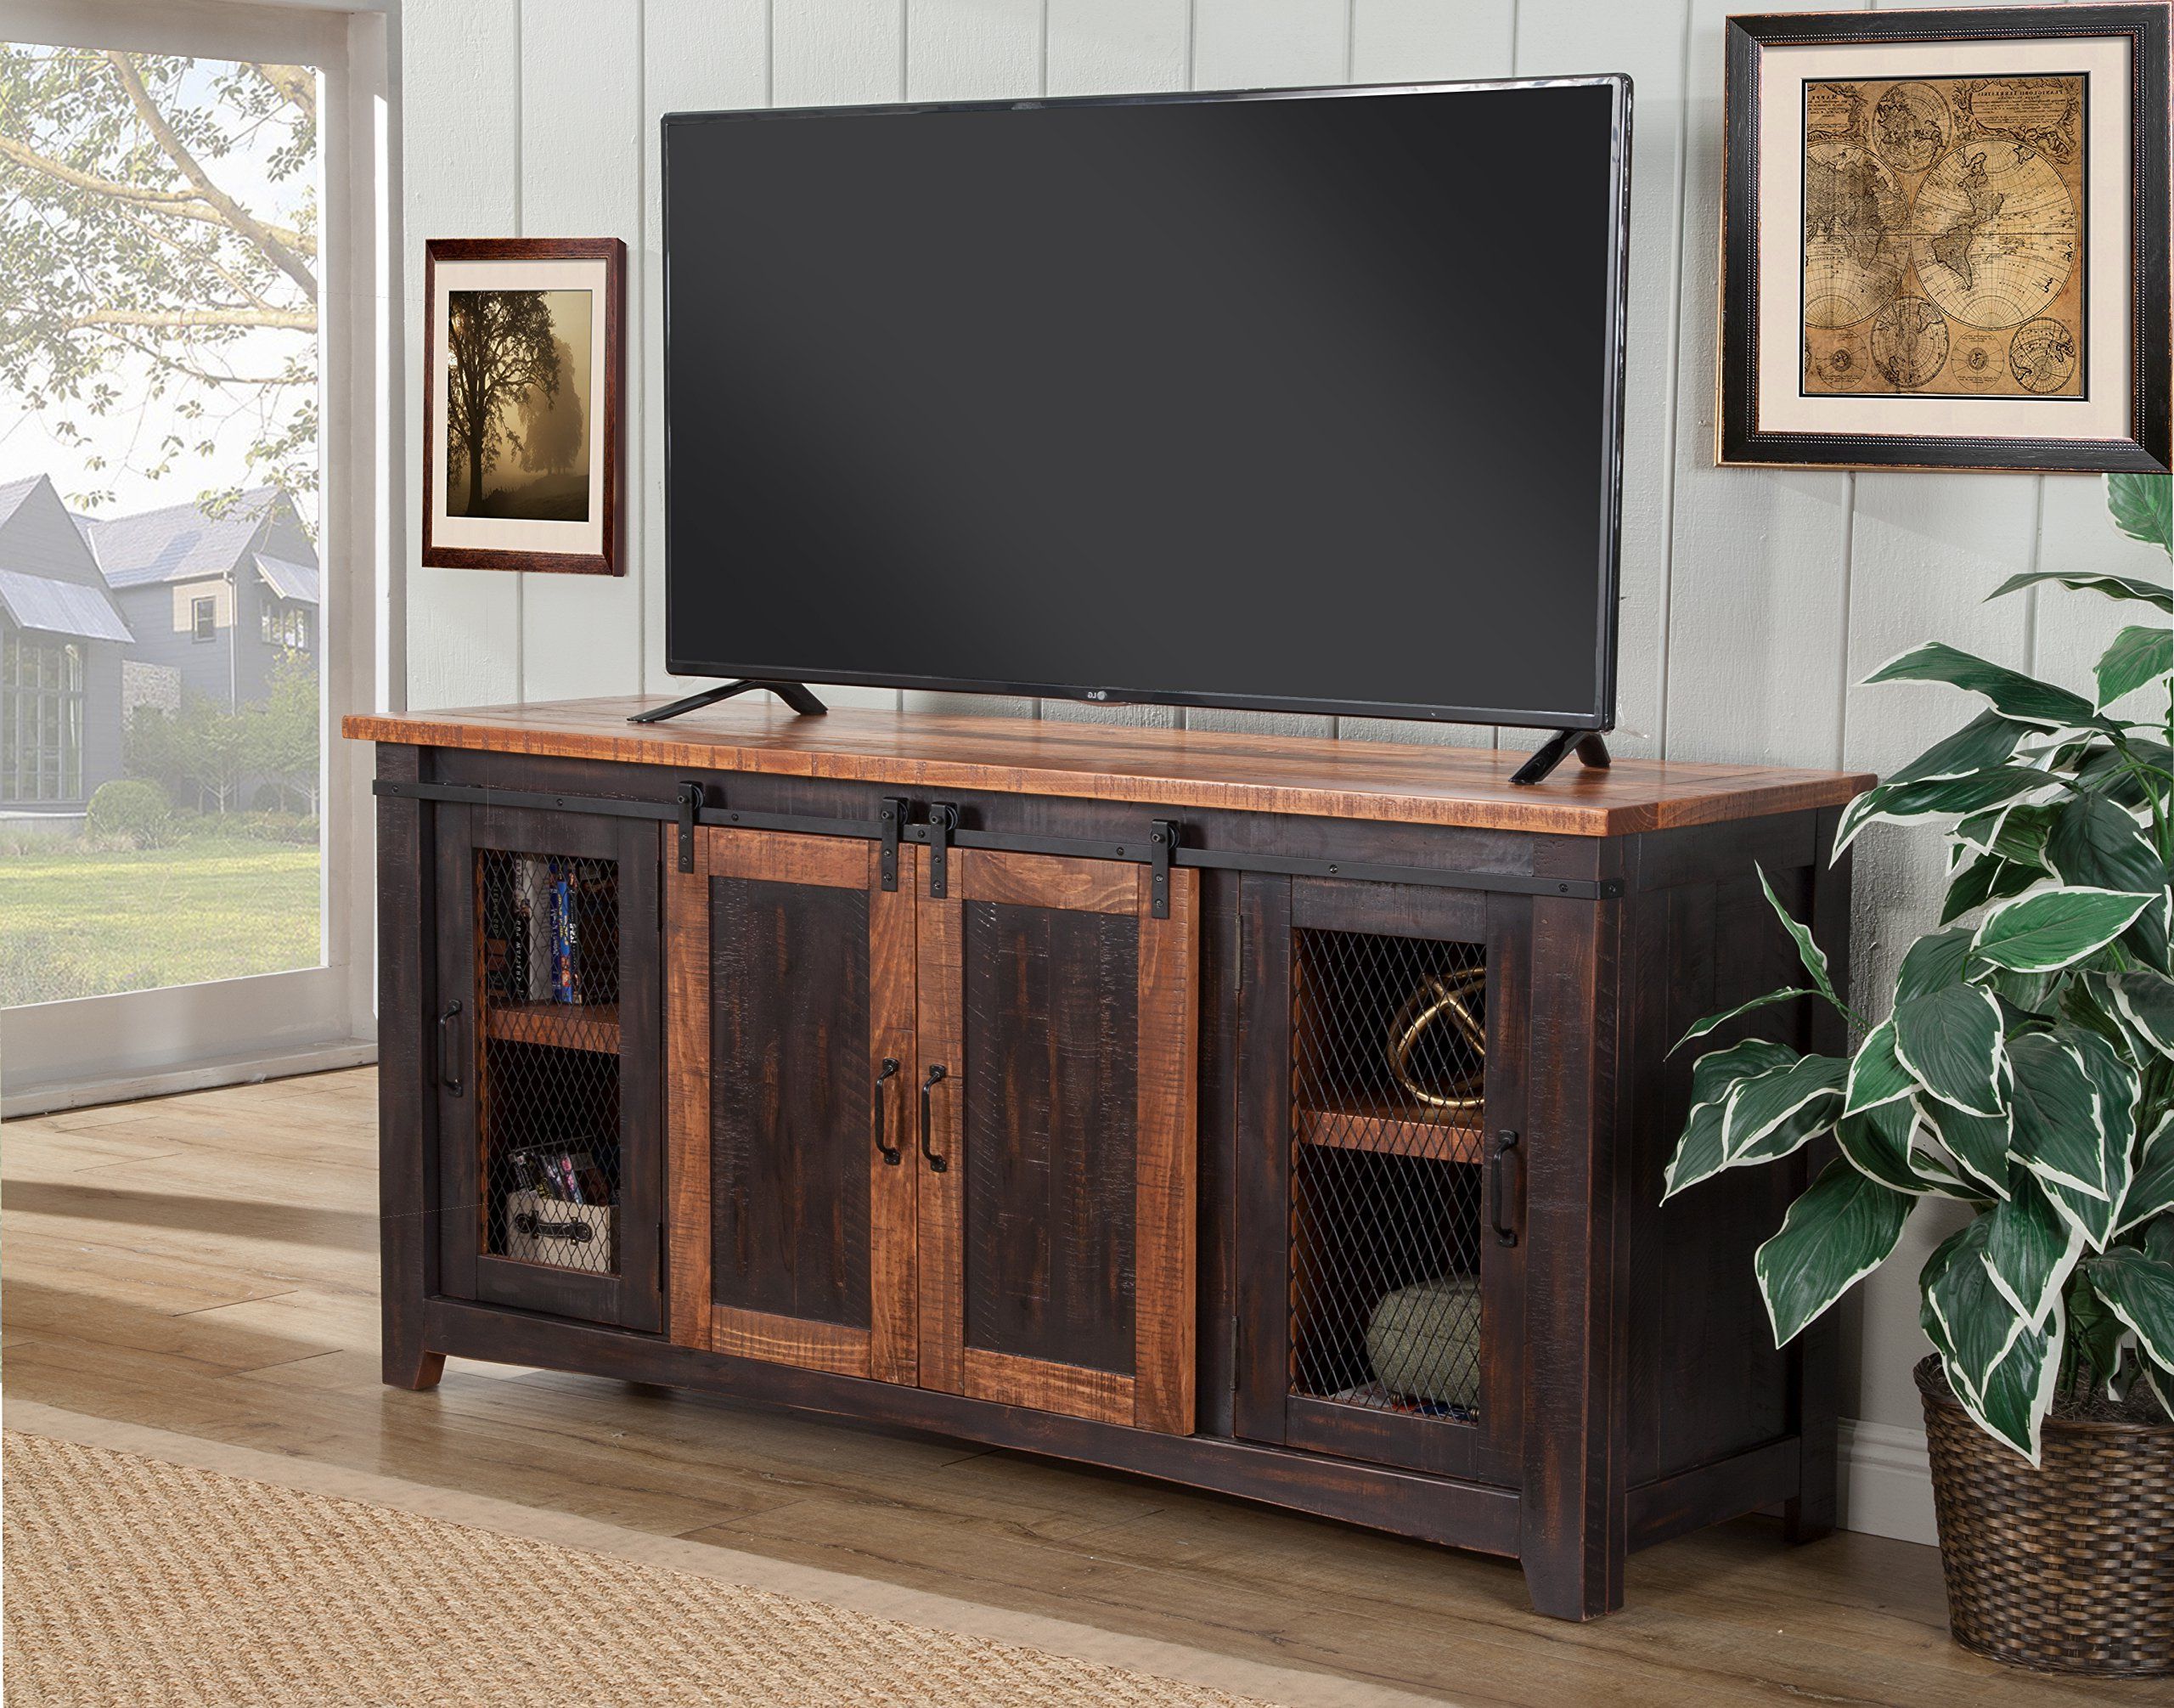 Pemberly Row Farmhouse Sliding Door Wood 52 Highboy Tv Stand Console For Fashionable Modern Farmhouse Rustic Tv Stands (View 12 of 15)